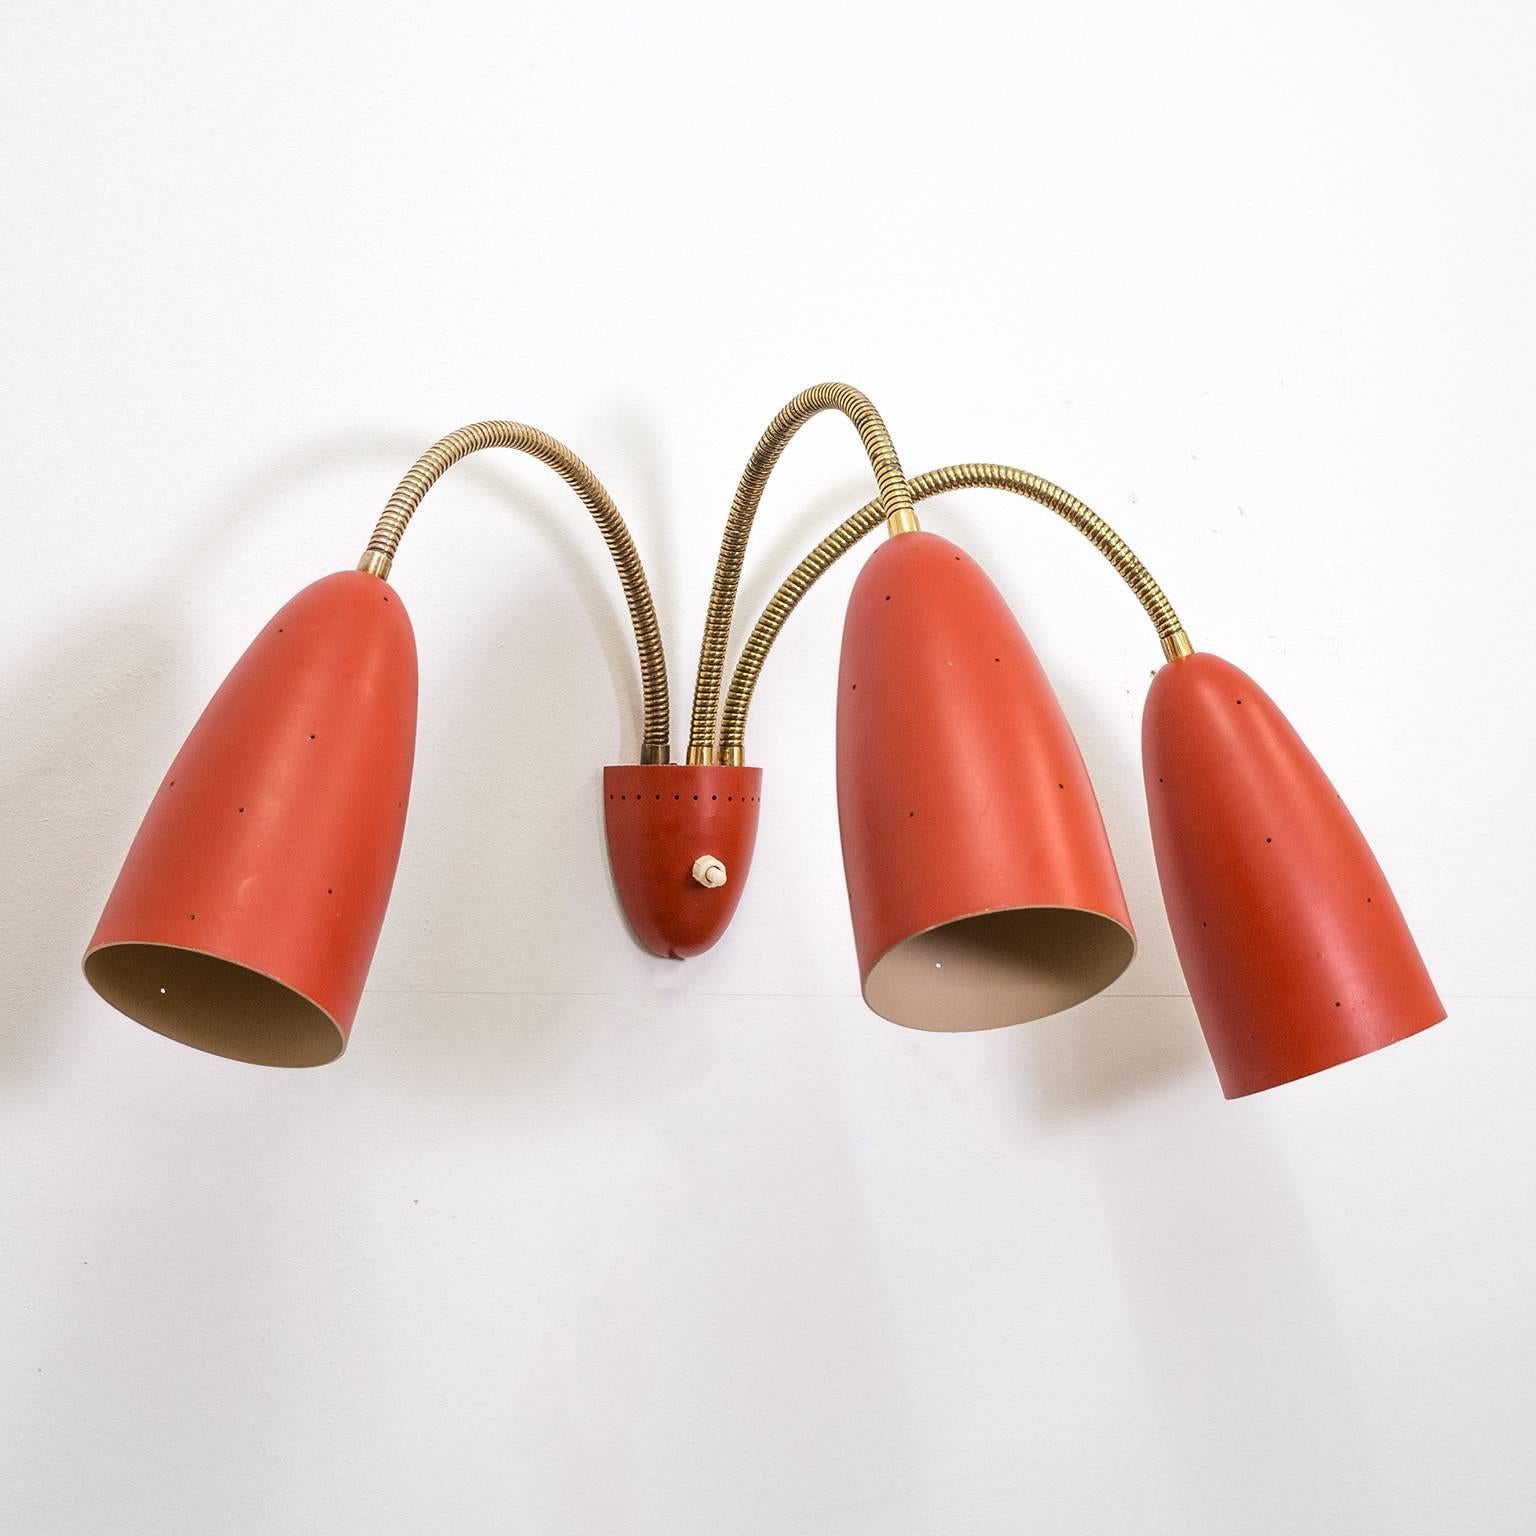 Beautiful midcentury wall light with three large pierced red cones on brass 'goose necks'. Wonderful original condition with only very minor usage signs on the original lacquer. The cones measure 7.5inches/19cm in length and have a diameter of